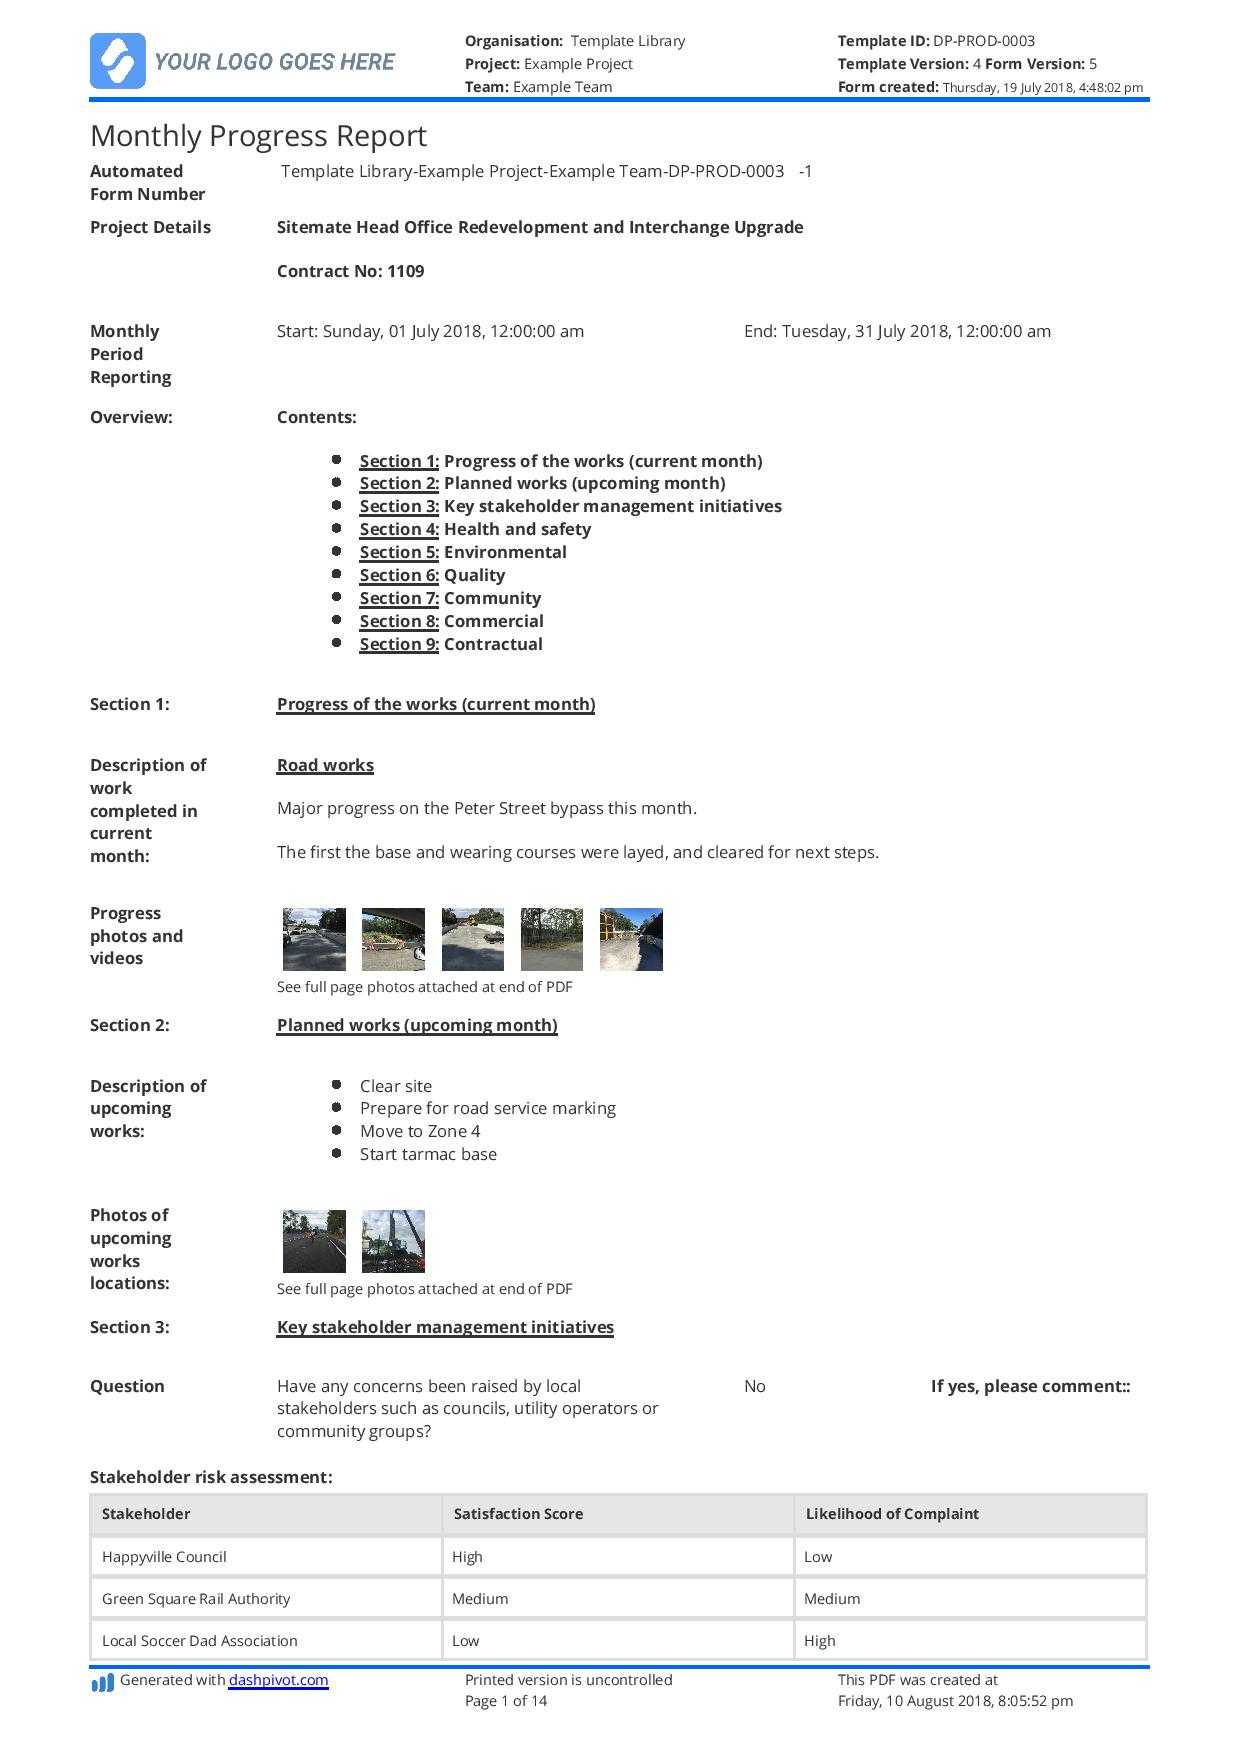 Monthly Construction Progress Report Template: Use This In Progress Report Template For Construction Project